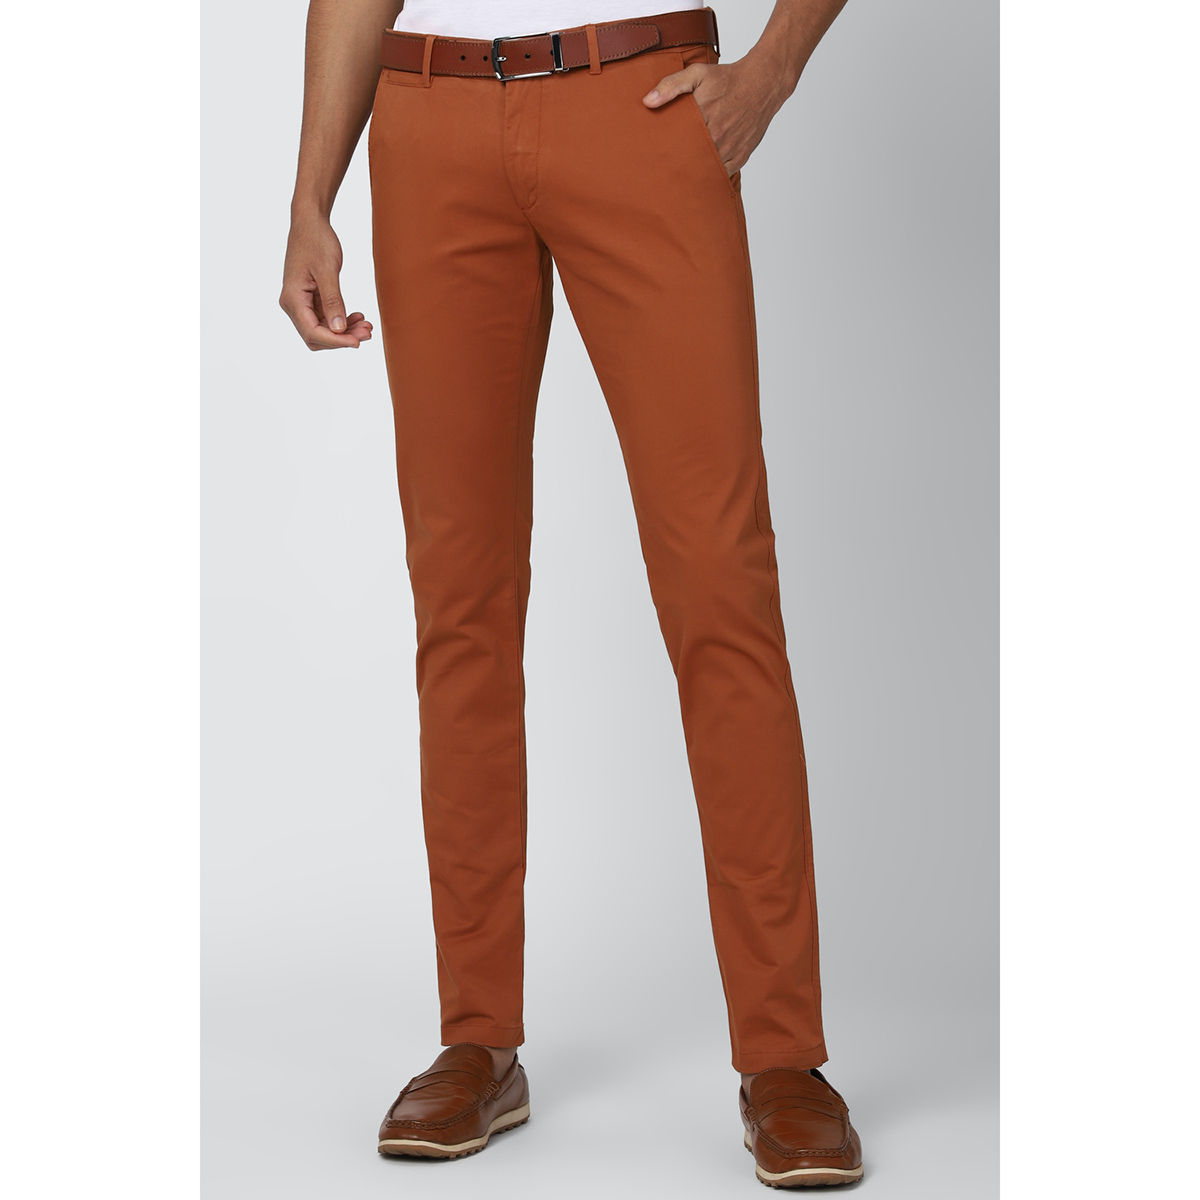 Peter England Super Slim Fit Trousers  Buy Peter England Super Slim Fit  Trousers online in India